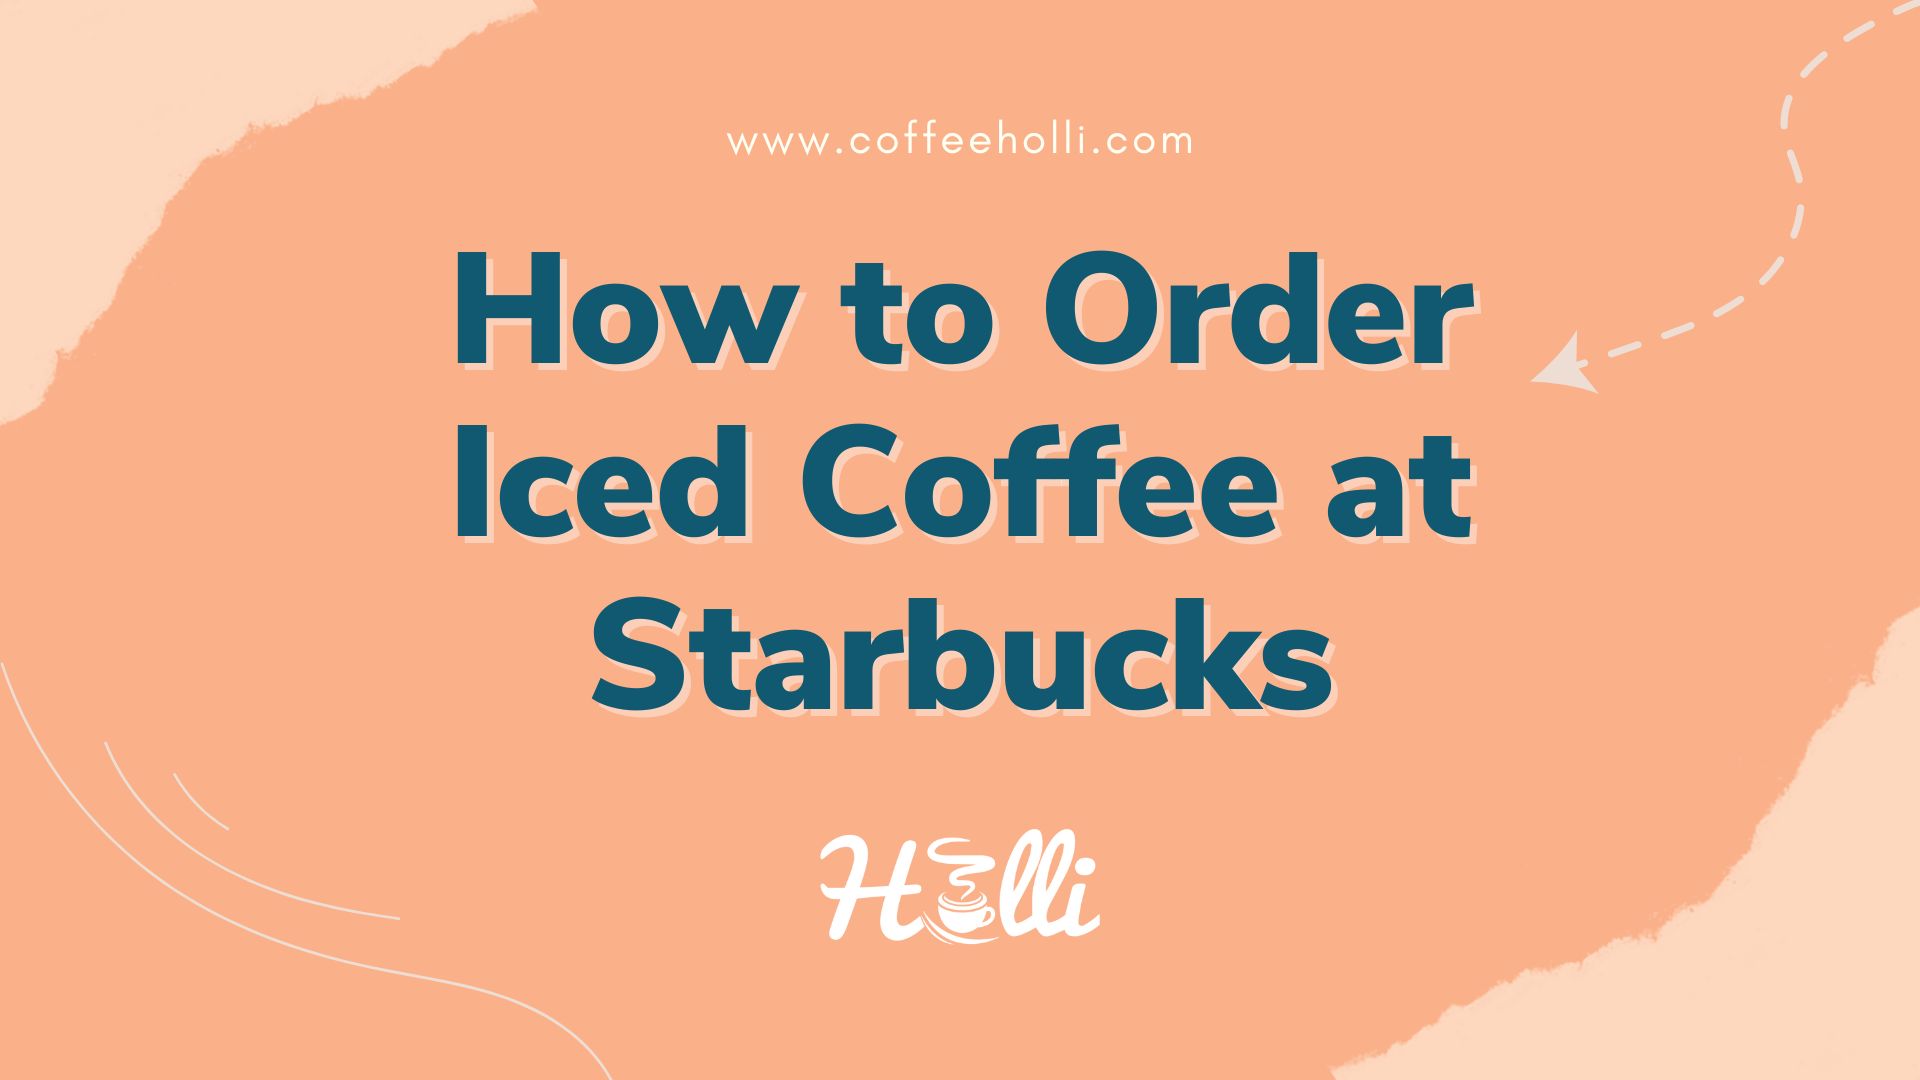 How to Order Iced Coffee at Starbucks